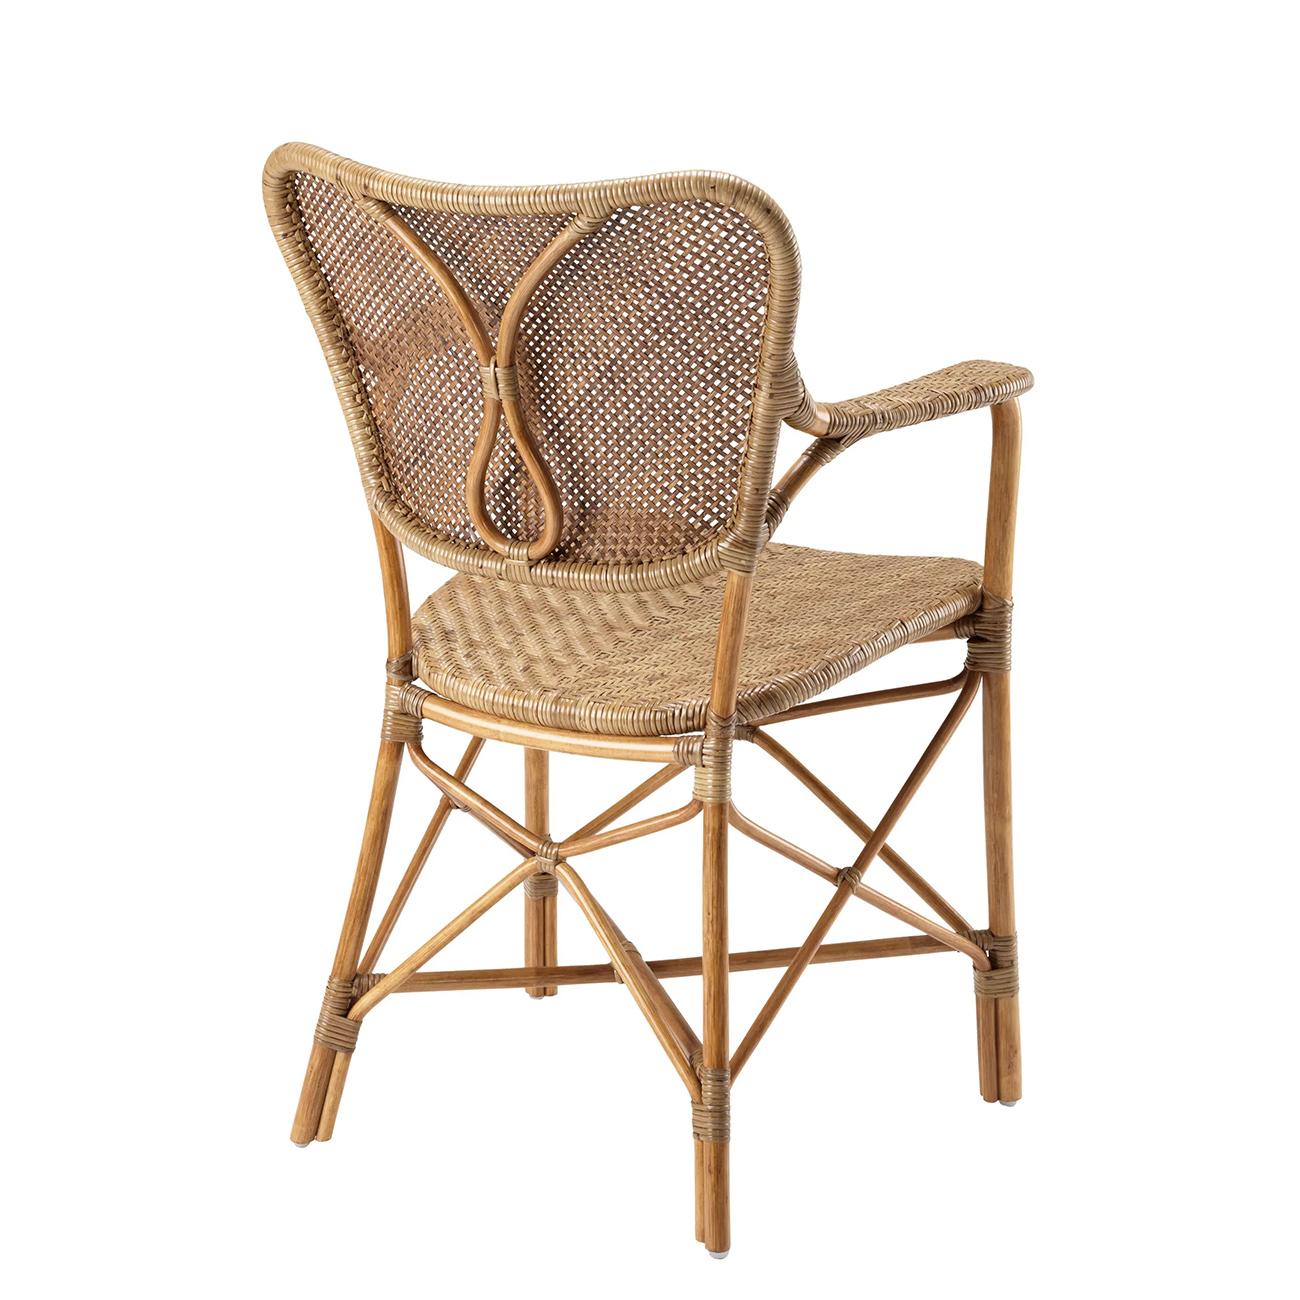 Hand-Crafted Rattan Style Chair with Arm For Sale